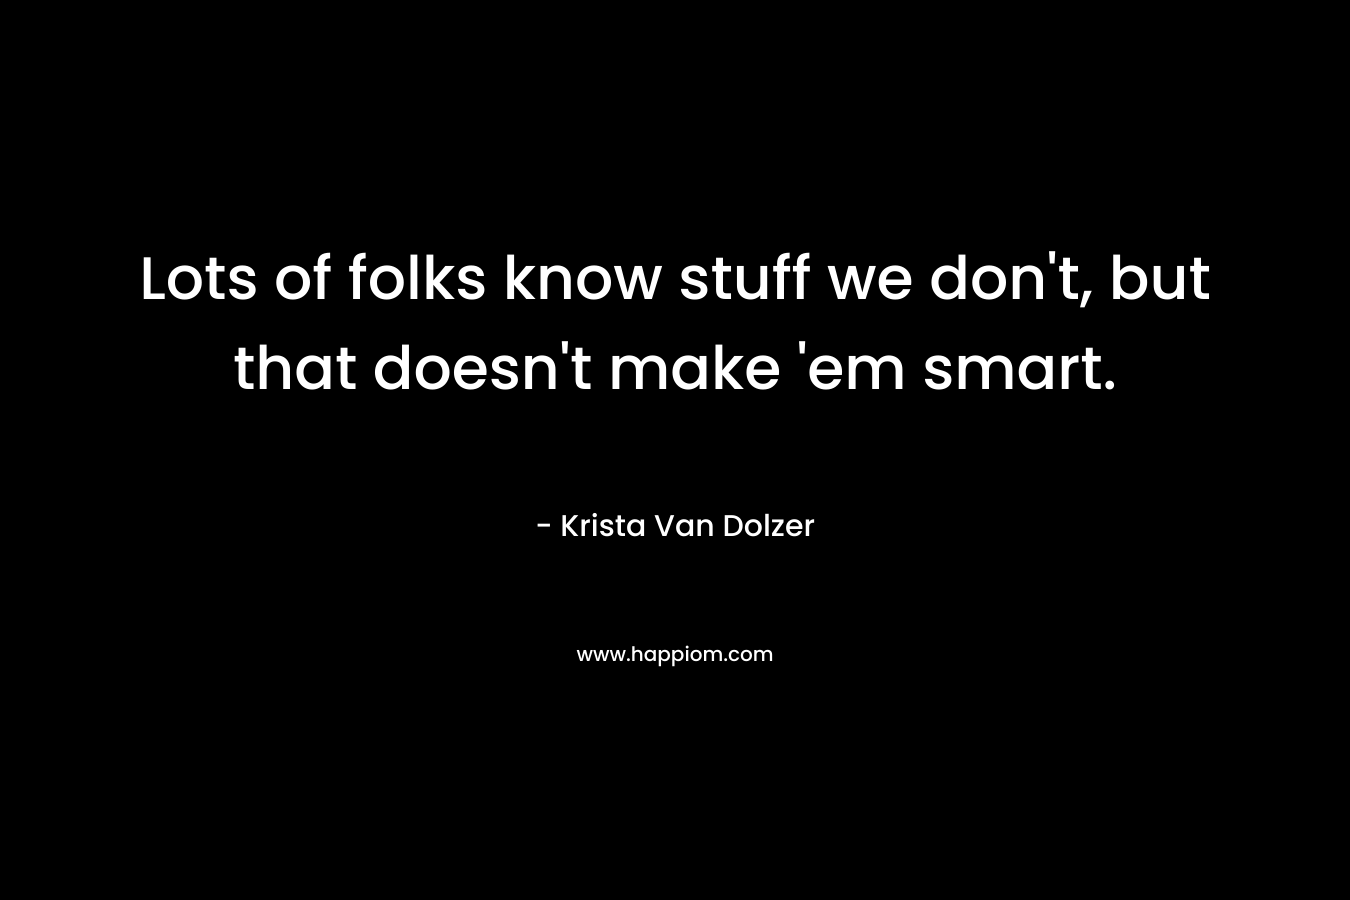 Lots of folks know stuff we don't, but that doesn't make 'em smart.